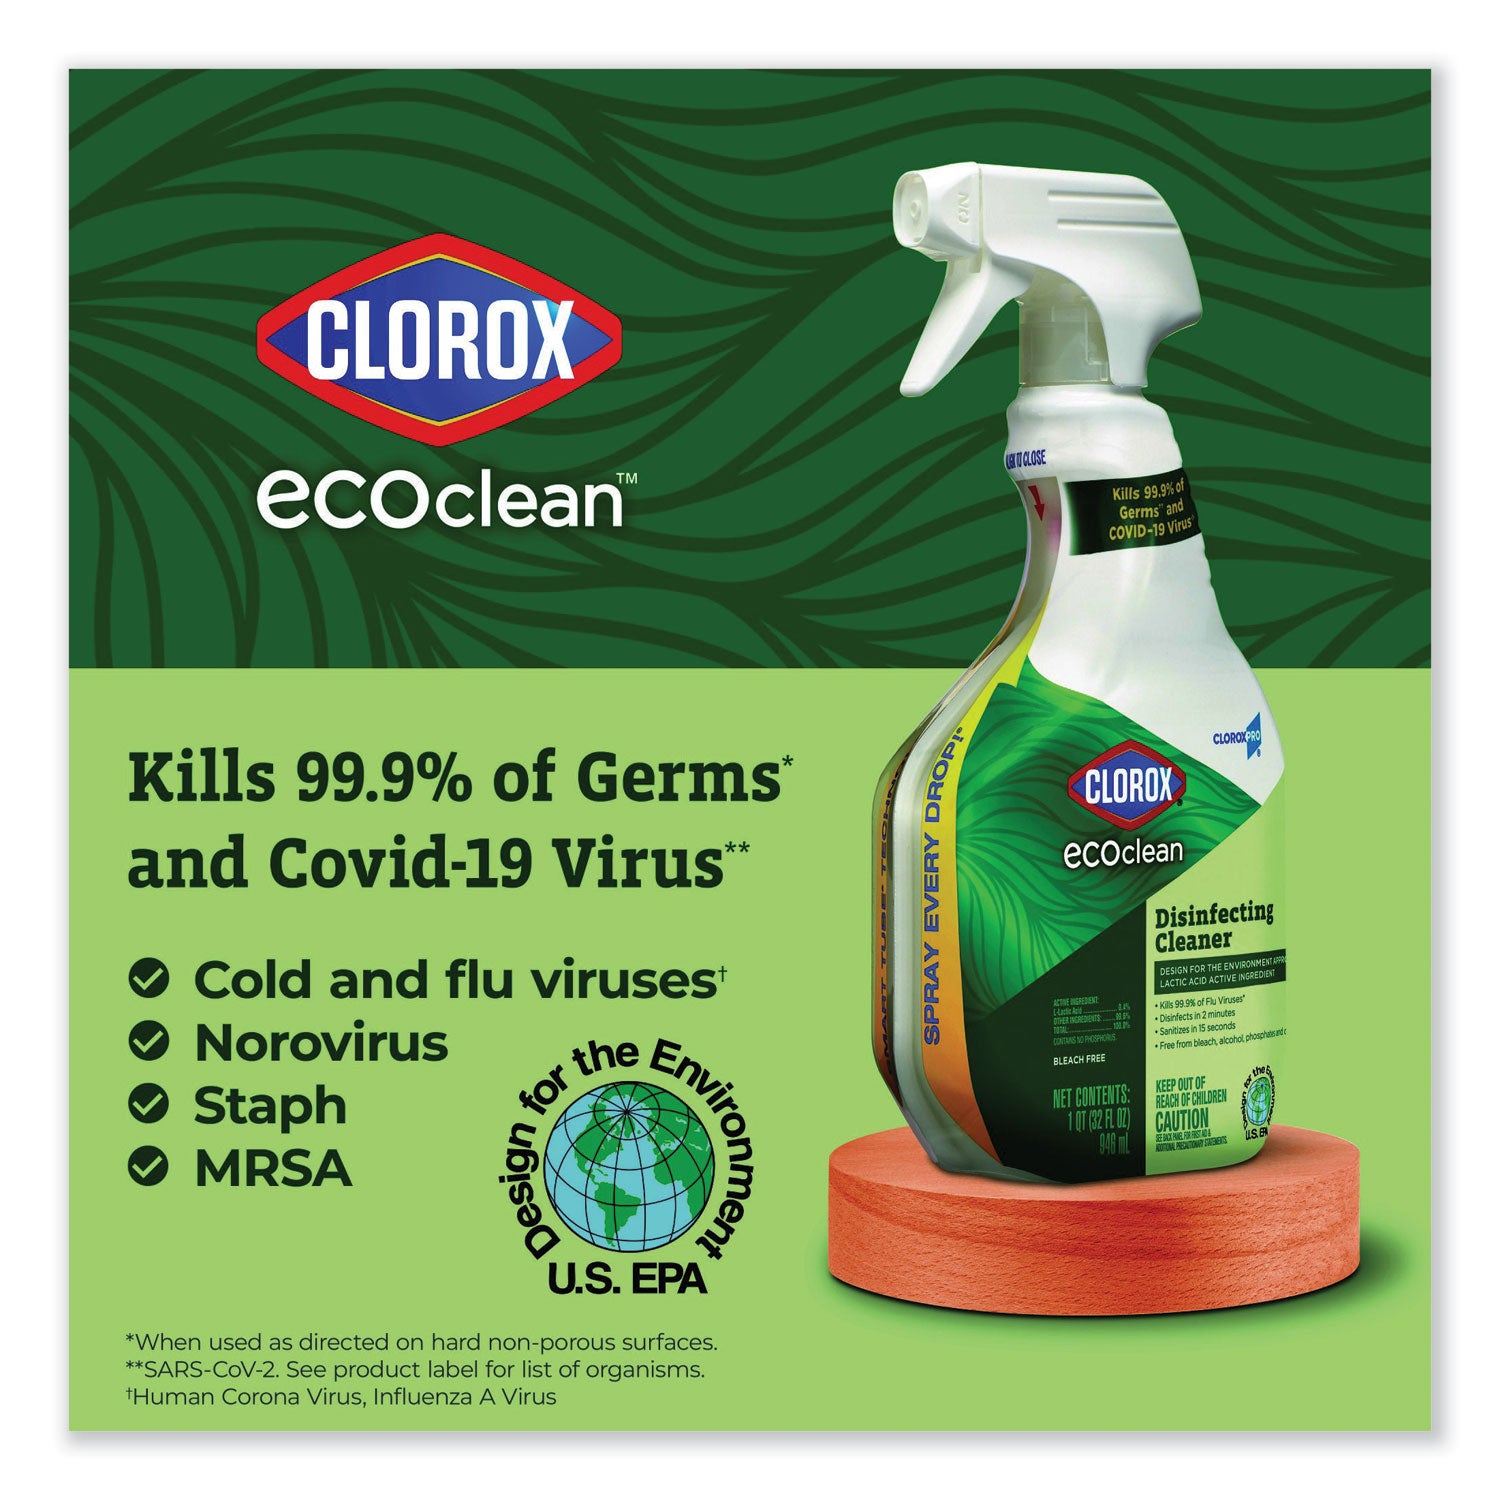 clorox-pro-ecoclean-disinfecting-cleaner-unscented-32-oz-spray-bottle-9-carton_clo60213ct - 6